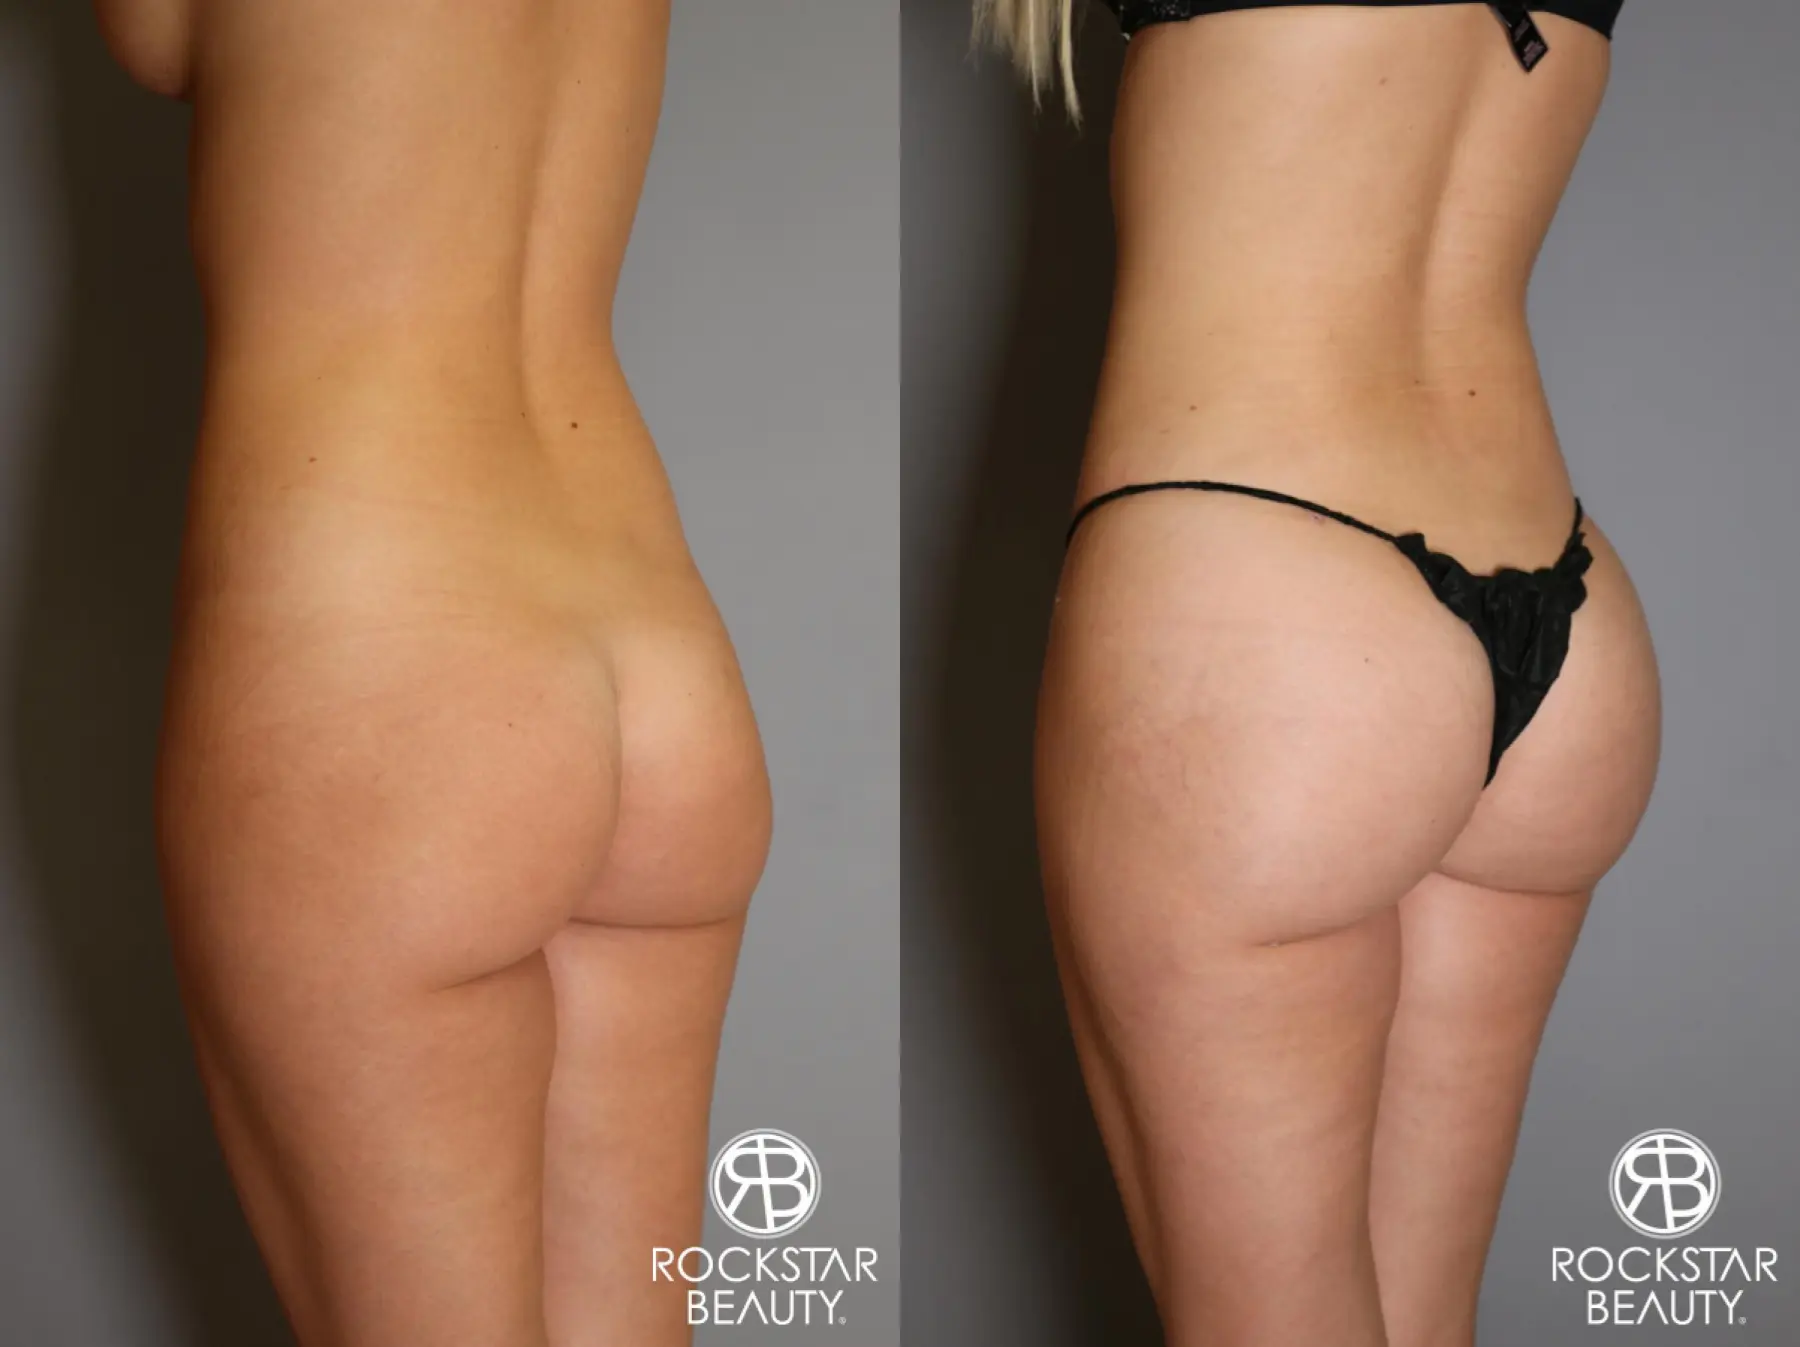 Brazilian Butt Lift: Patient 2 - Before and After 3